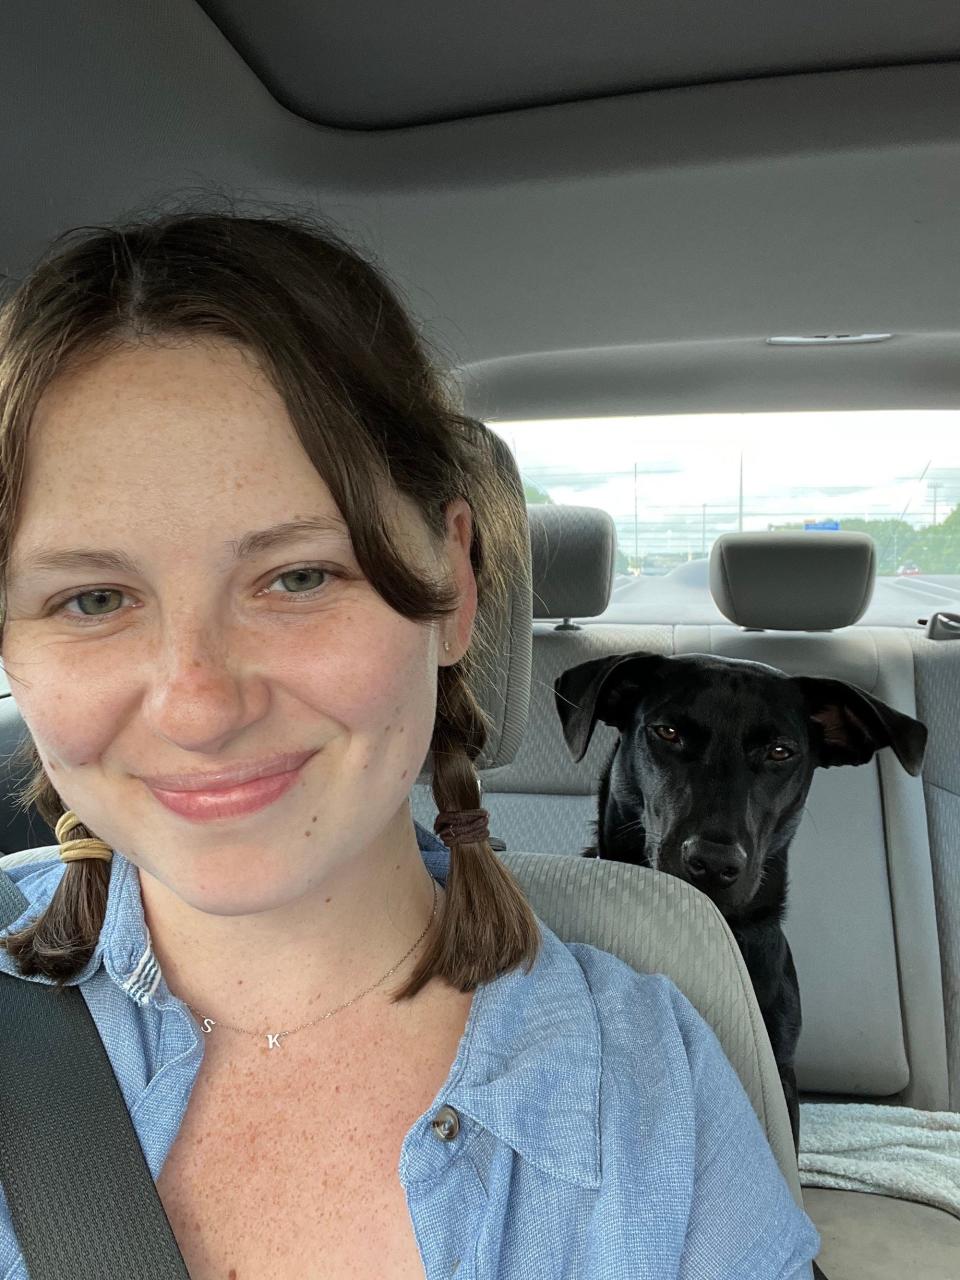 A woman in pigtails smiles in the front seat of a car as a dog looks over her shoulder.